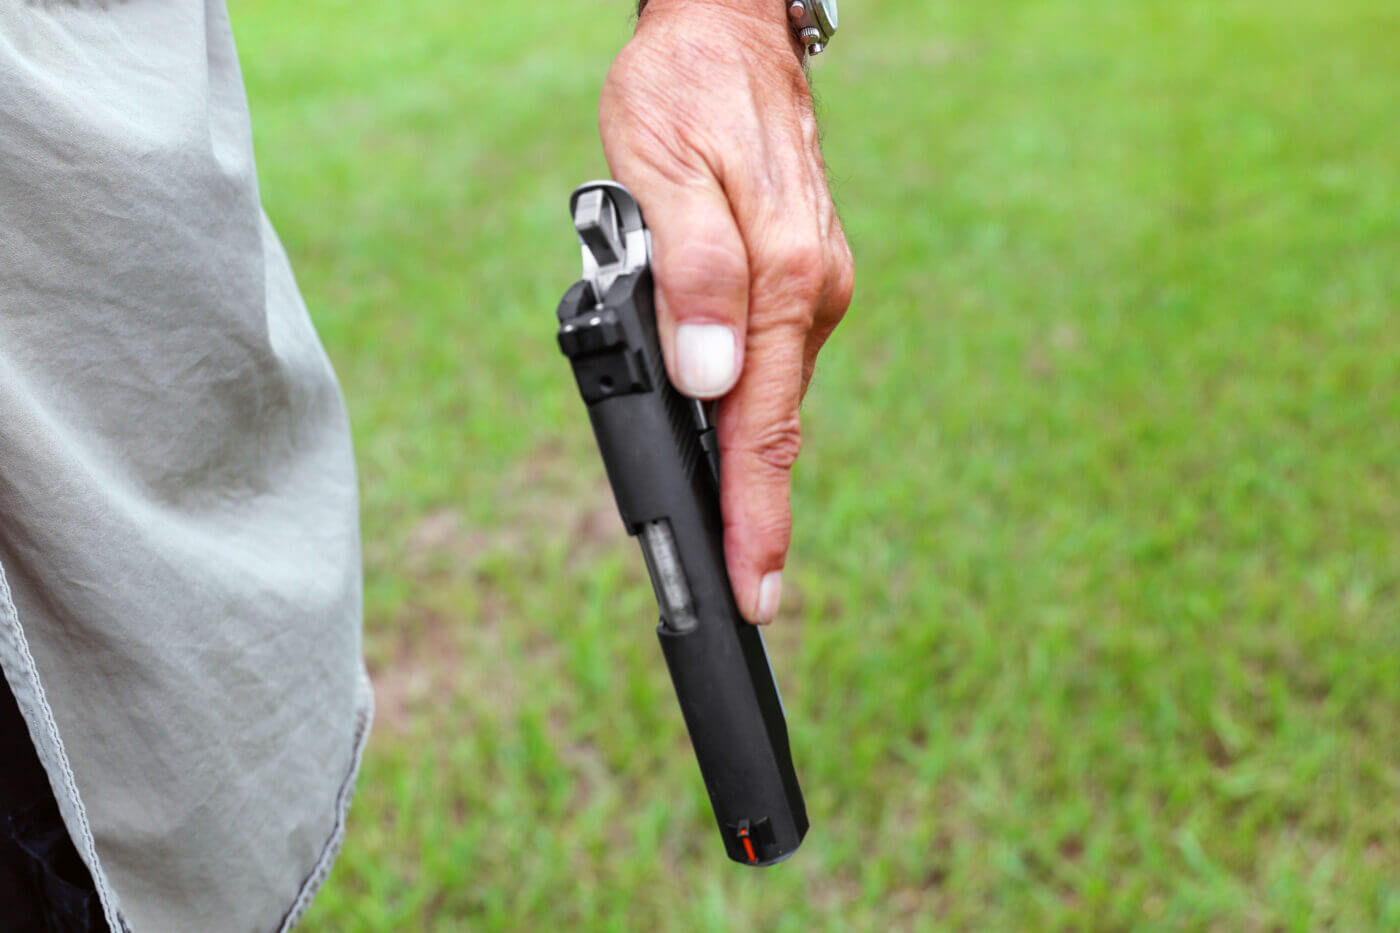 Ayoob demonstrates an alternative way of taking the safety off on a 1911 pistol.